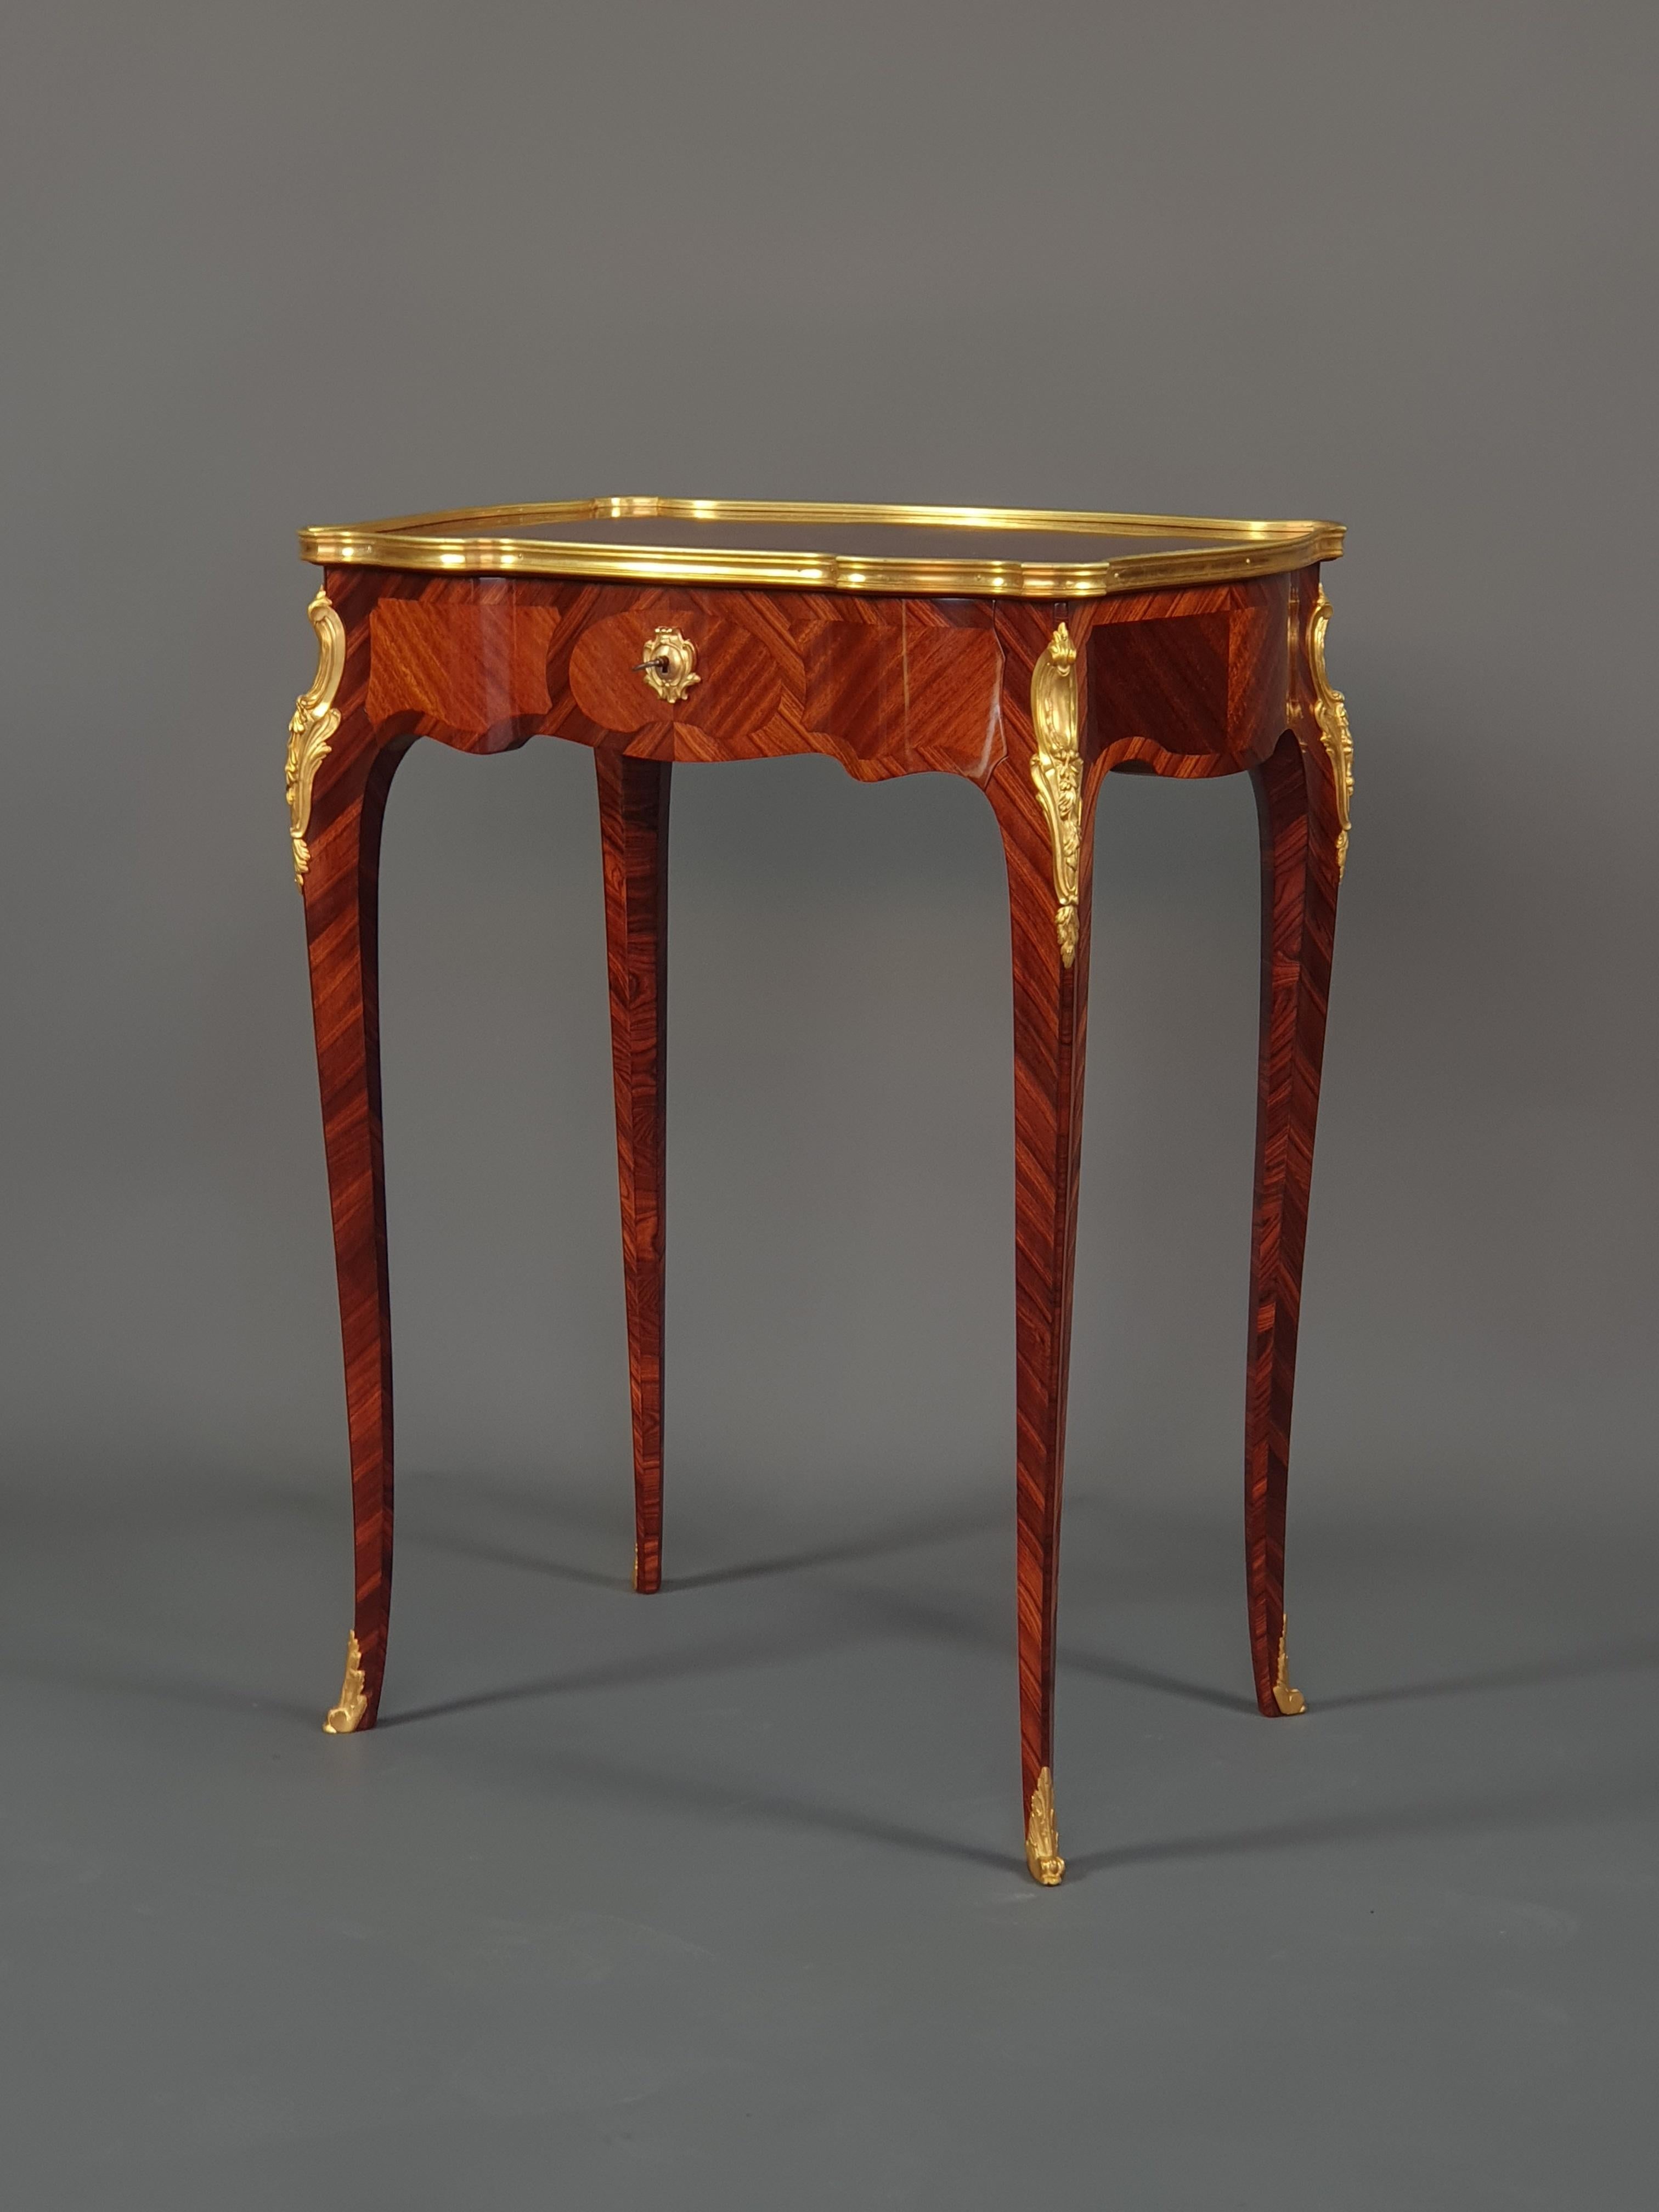 Very elegant Louis XV style table d'appoint in rosewood and mahogany marquetry in reserves, very finely chiseled gilt bronze ornamentation. Four slightly curved legs presenting a top with sinuous and asymmetrical fretwork endowed with a beautiful